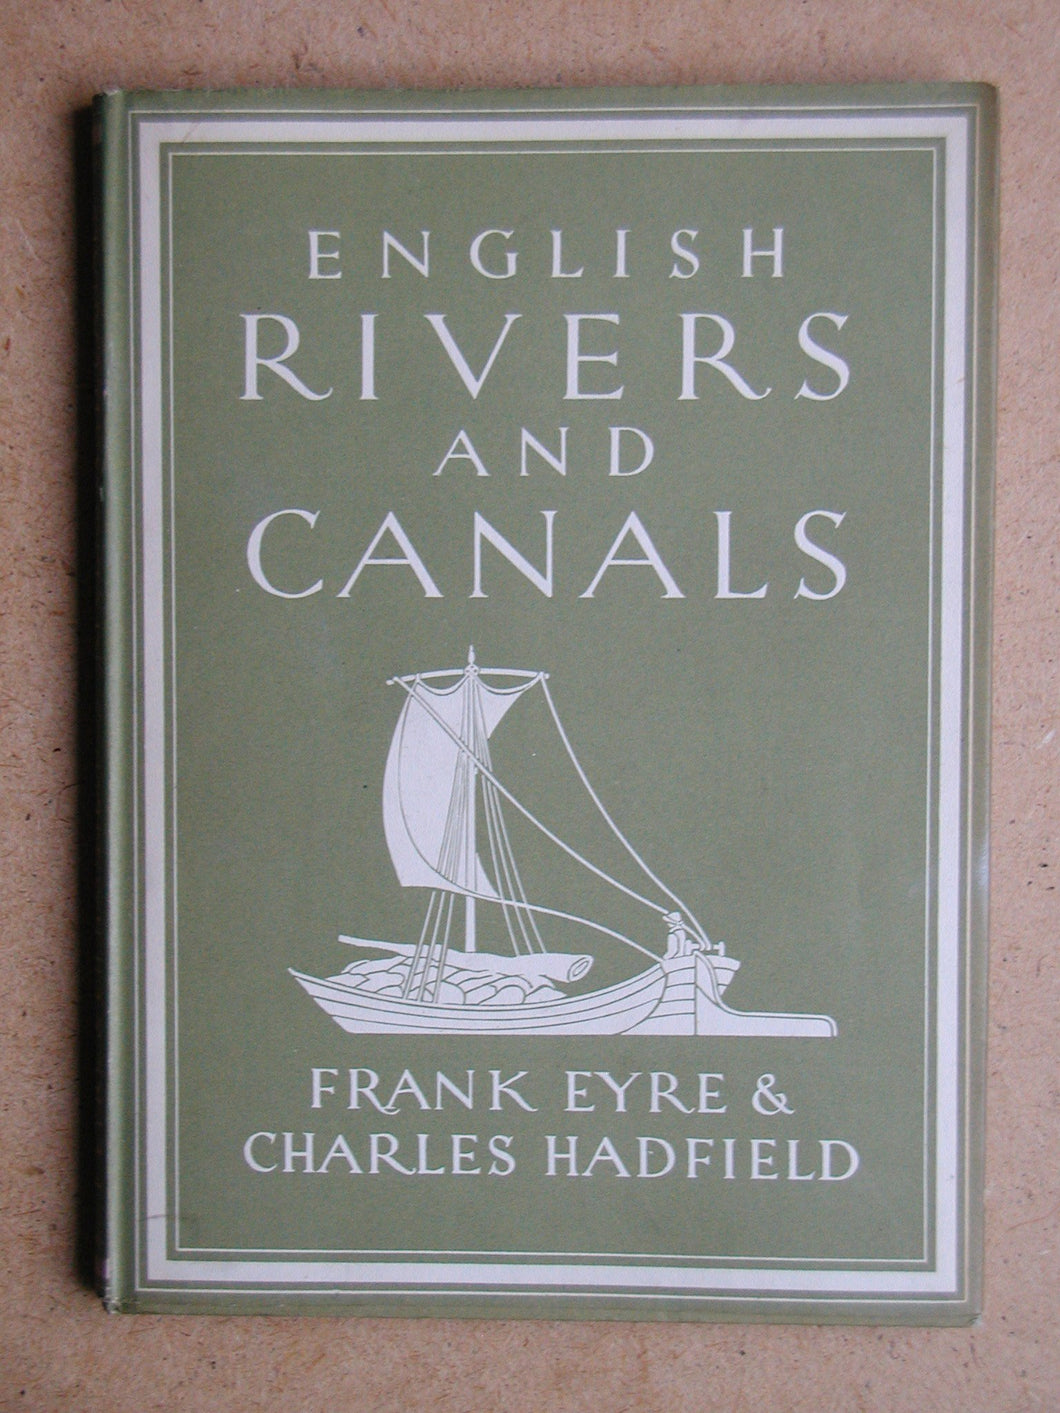 English Rivers and Canals [Hardcover] Eyre, Frank & Charles Hadfield.